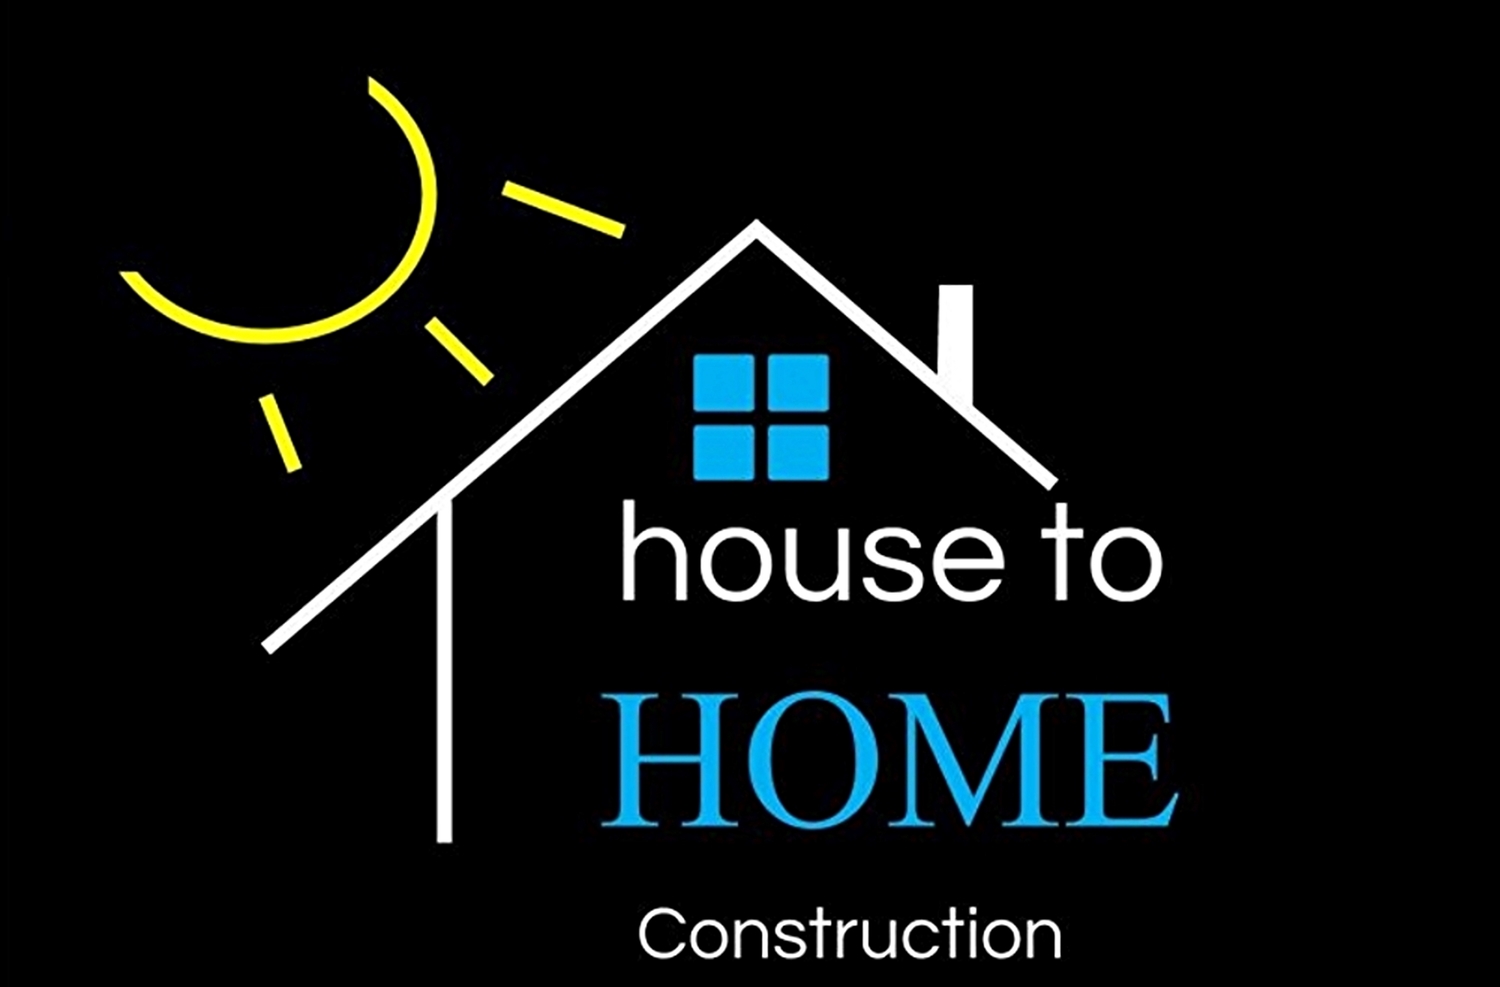 House to HOME Construction. Home Remodel, New HOME Construction, Repair 